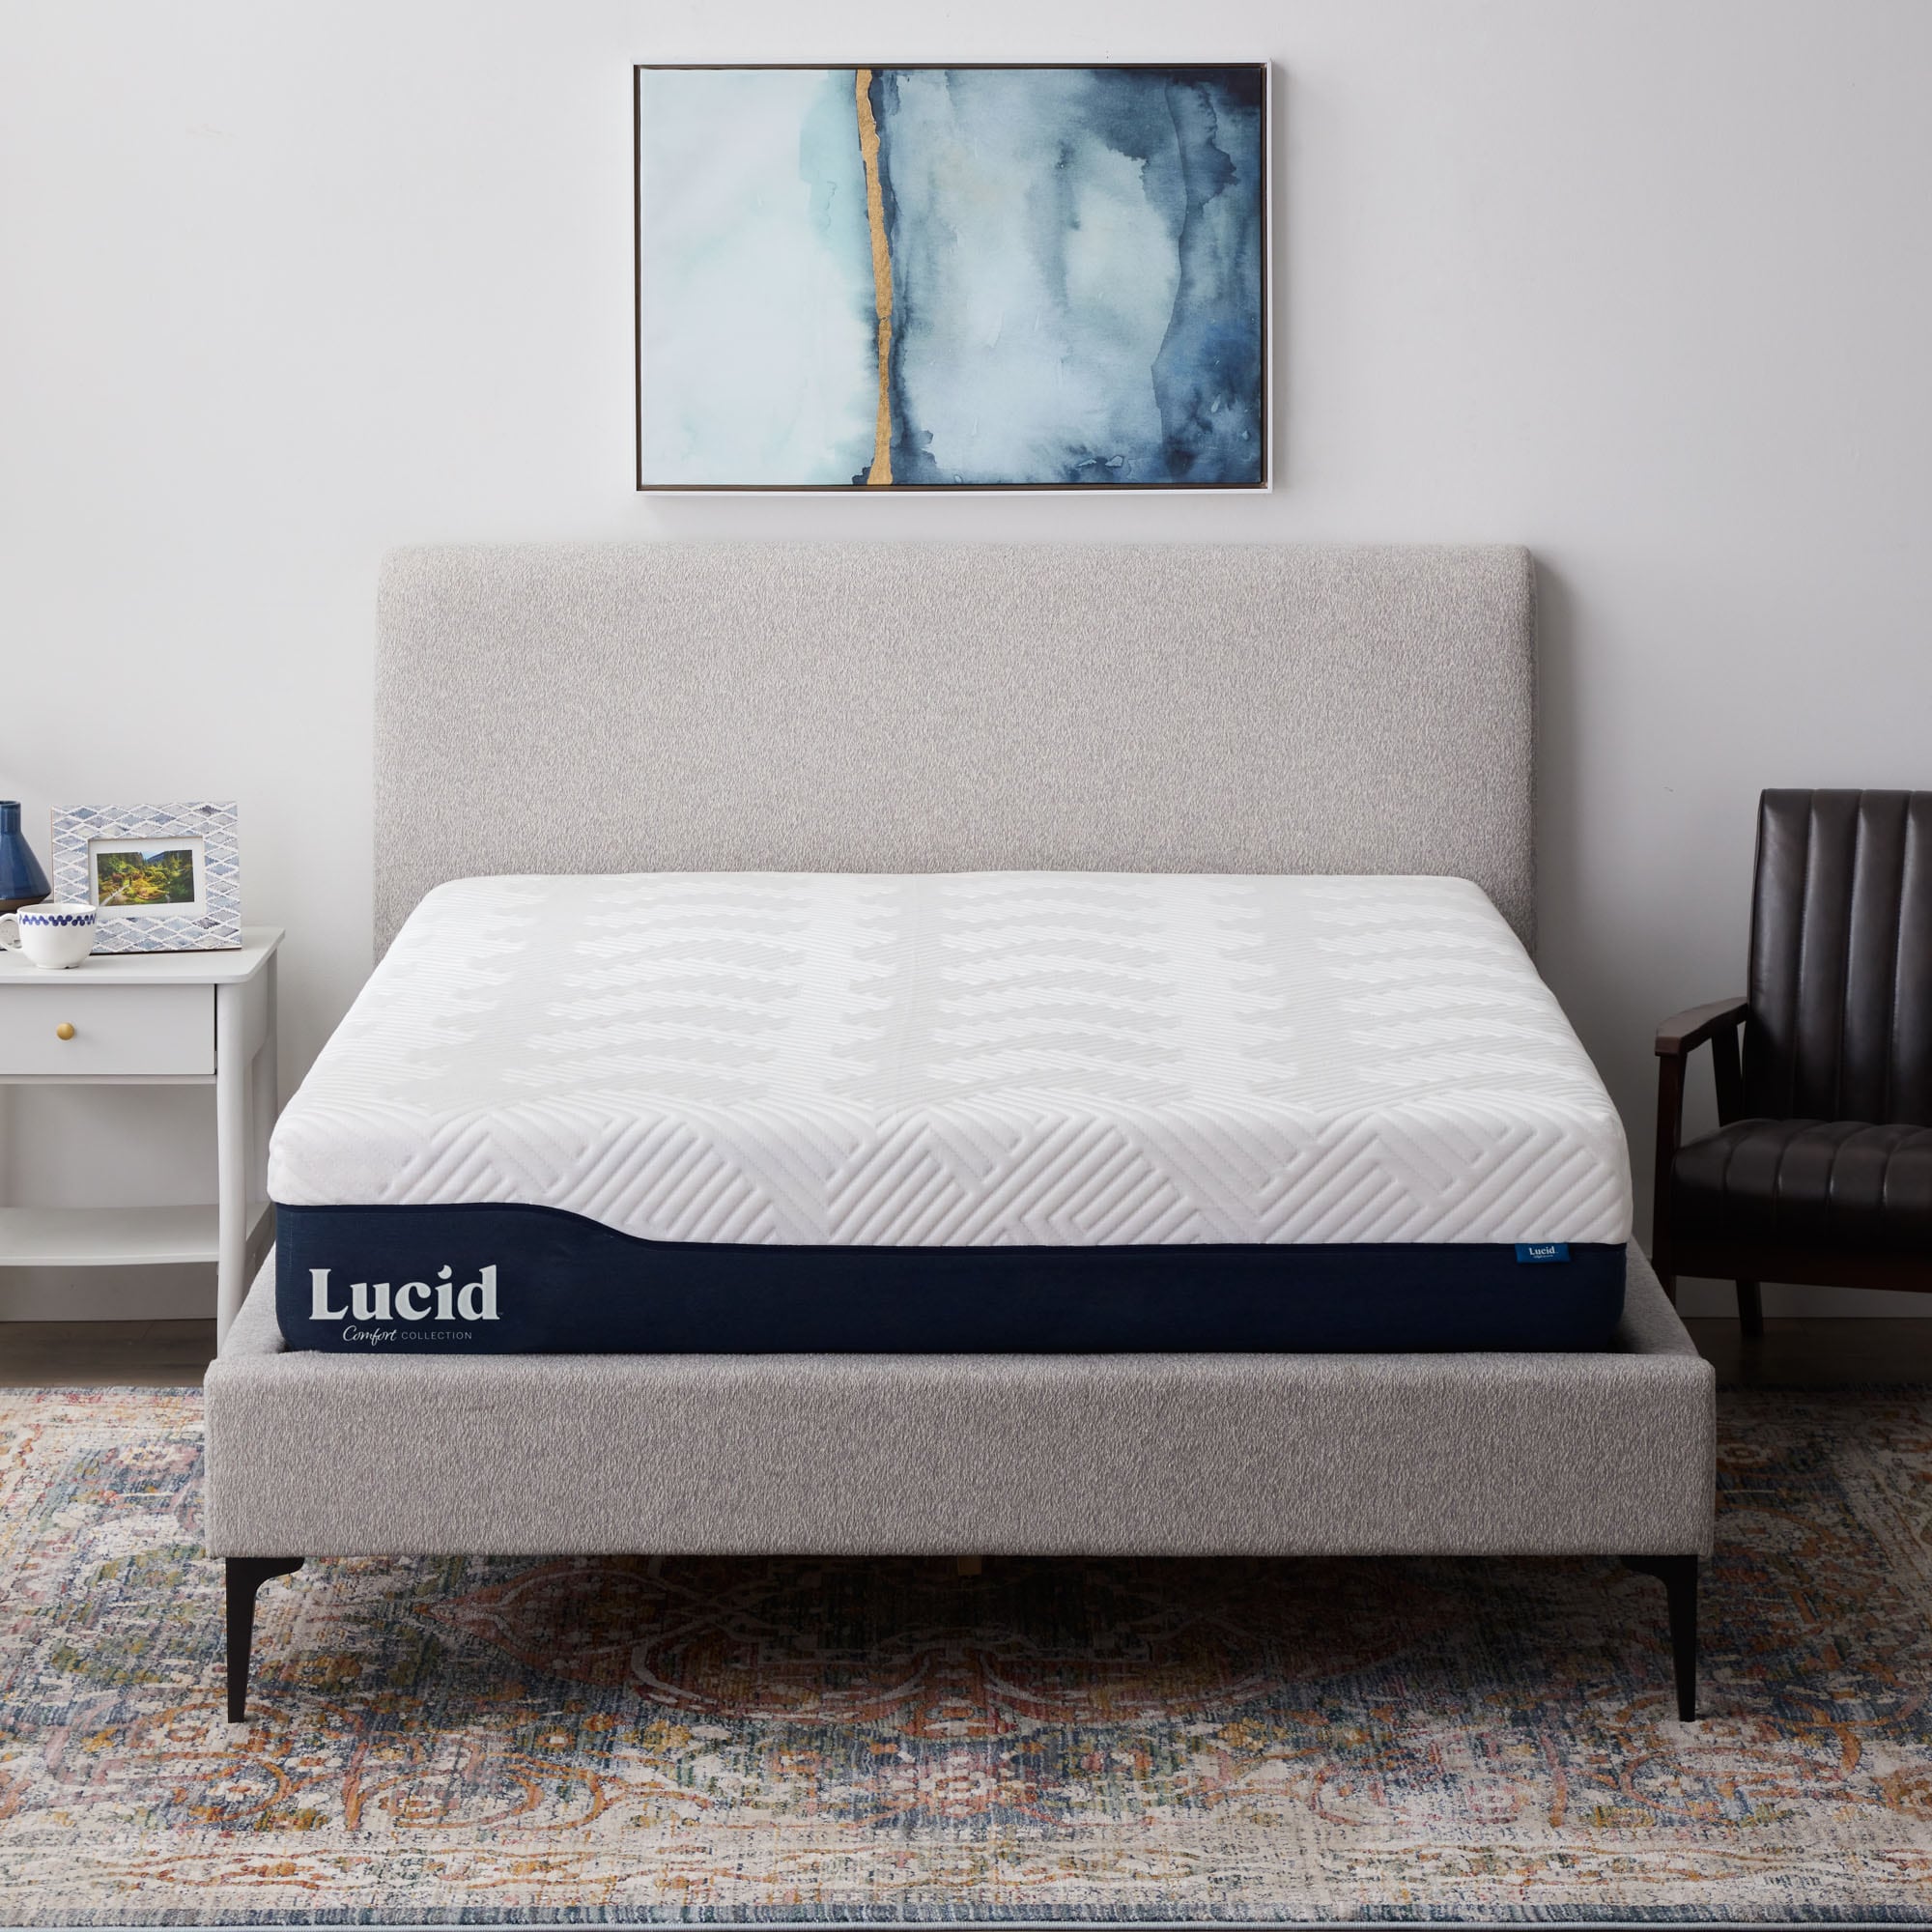 Gel and Aloe Vera 12-in King Hybrid Memory Foam/Coil Blend Mattress in a Box in White | - LUCID Comfort Collection LUCC12KK38GH